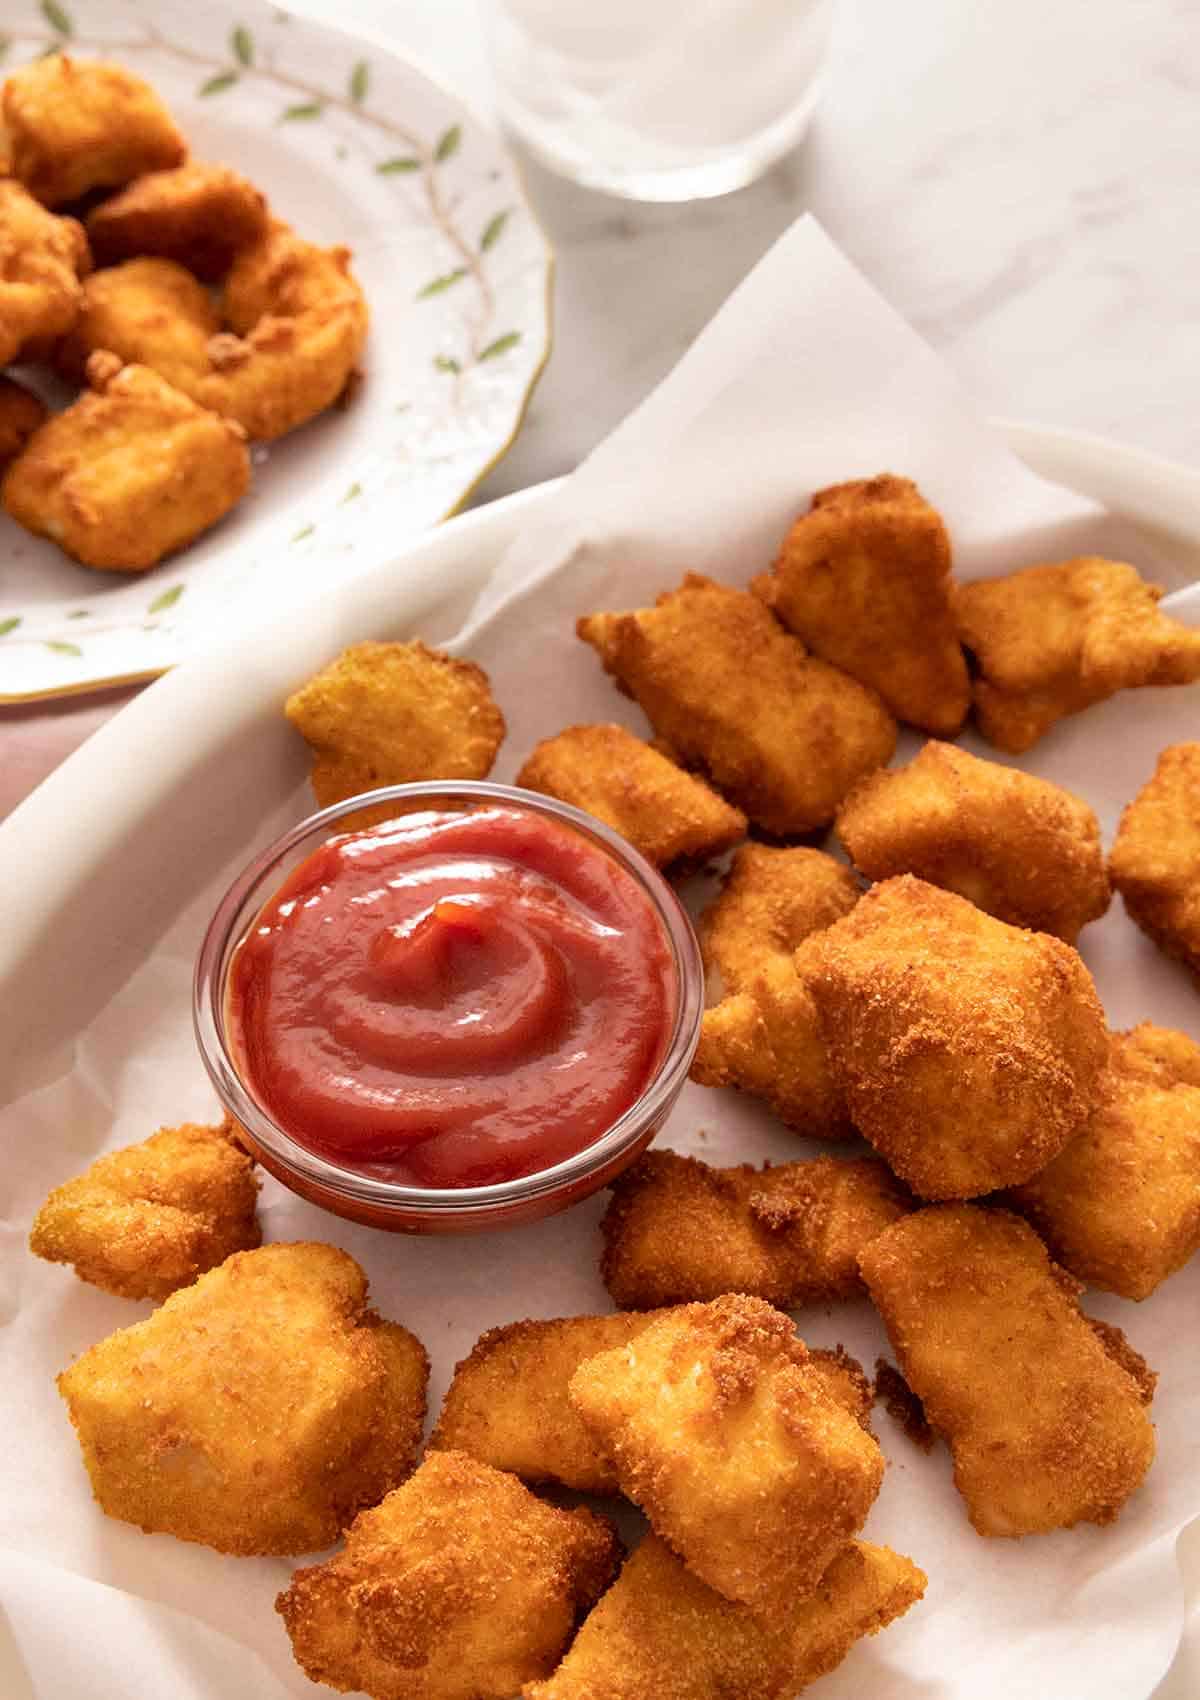 A plate of chicken nuggets with a bowl of ketchup.